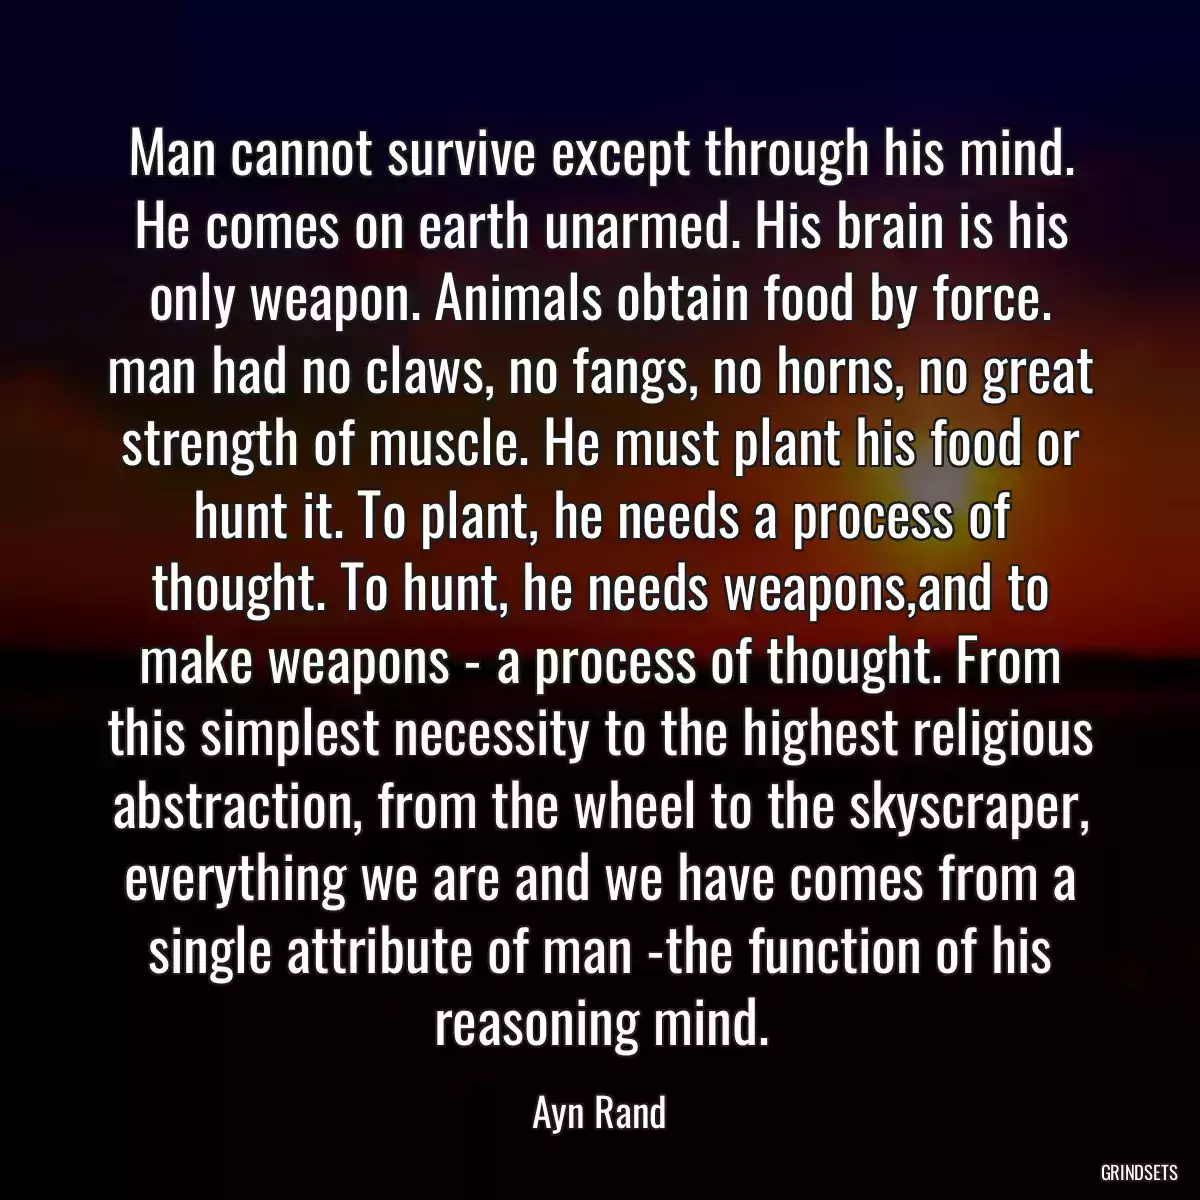 Man cannot survive except through his mind. He comes on earth unarmed. His brain is his only weapon. Animals obtain food by force. man had no claws, no fangs, no horns, no great strength of muscle. He must plant his food or hunt it. To plant, he needs a process of thought. To hunt, he needs weapons,and to make weapons - a process of thought. From this simplest necessity to the highest religious abstraction, from the wheel to the skyscraper, everything we are and we have comes from a single attribute of man -the function of his reasoning mind.